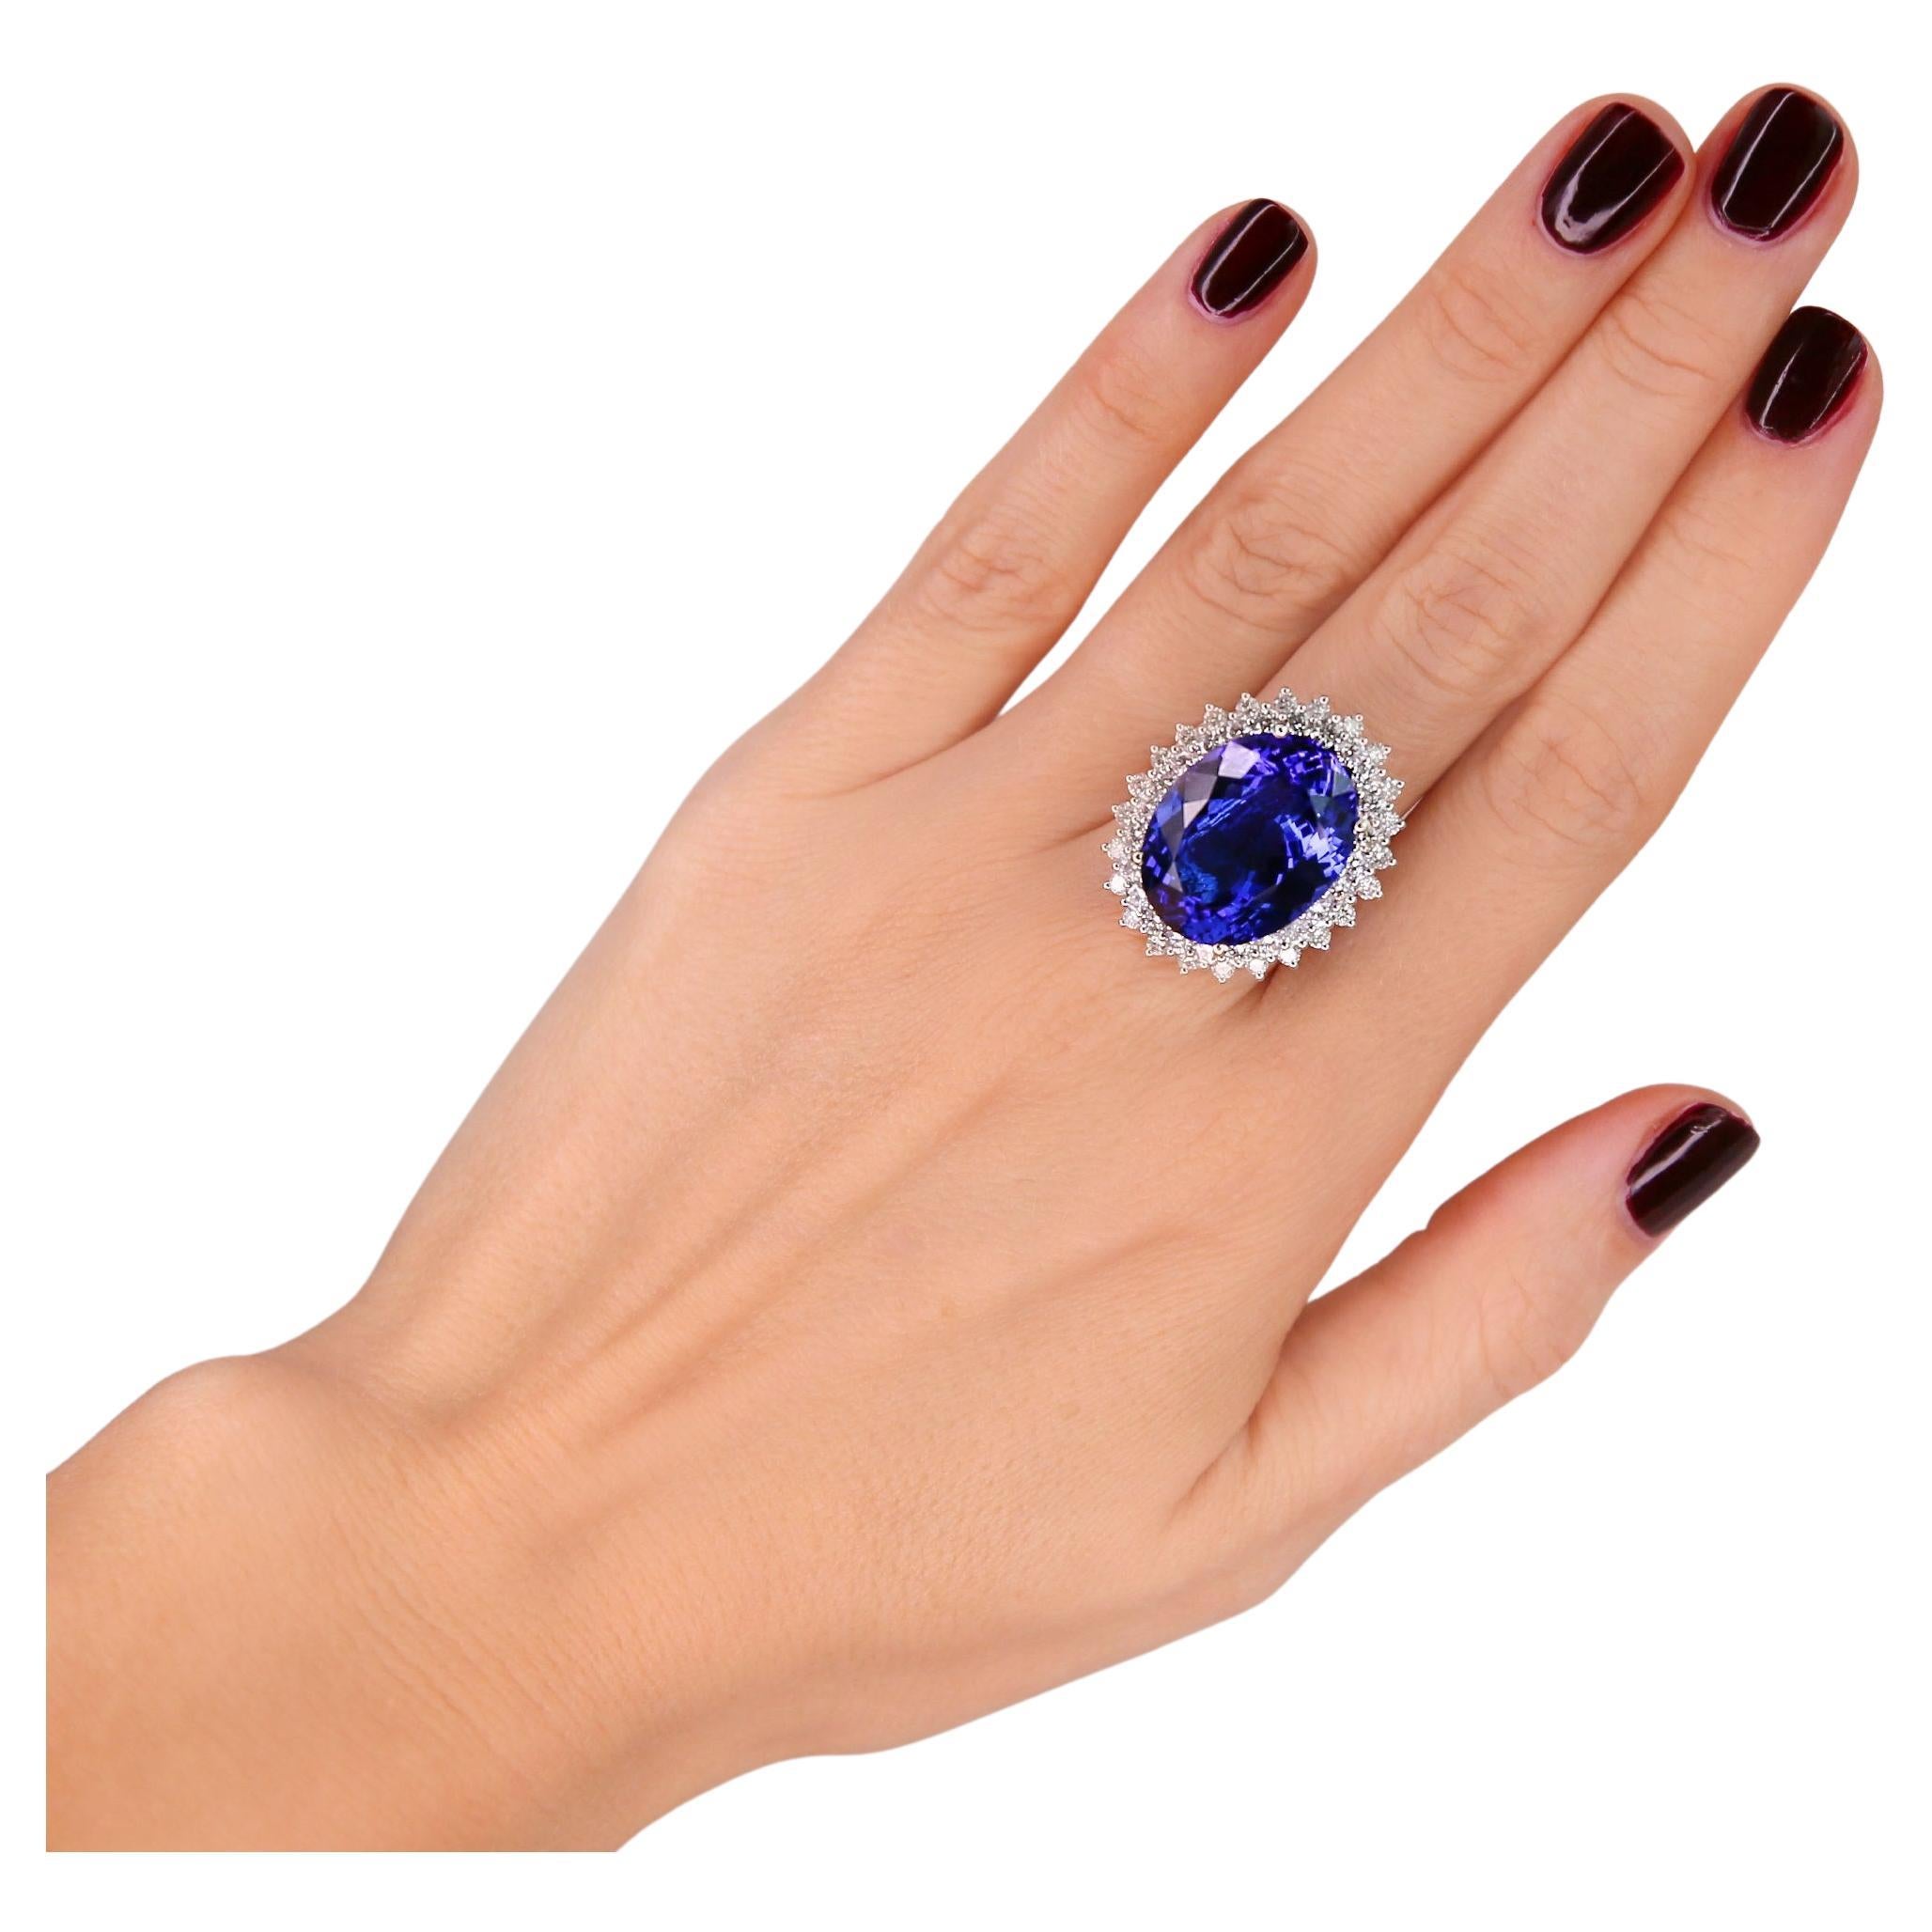 White Gold 18K Ring (Matching Earrings and Necklace Available)

Ring 18K White Gold

Tanzanite 43,23 ct

Diamonds 2, 55 ct

It is our honor to create fine jewelry, and it’s for that reason that we choose to only work with high-quality, enduring